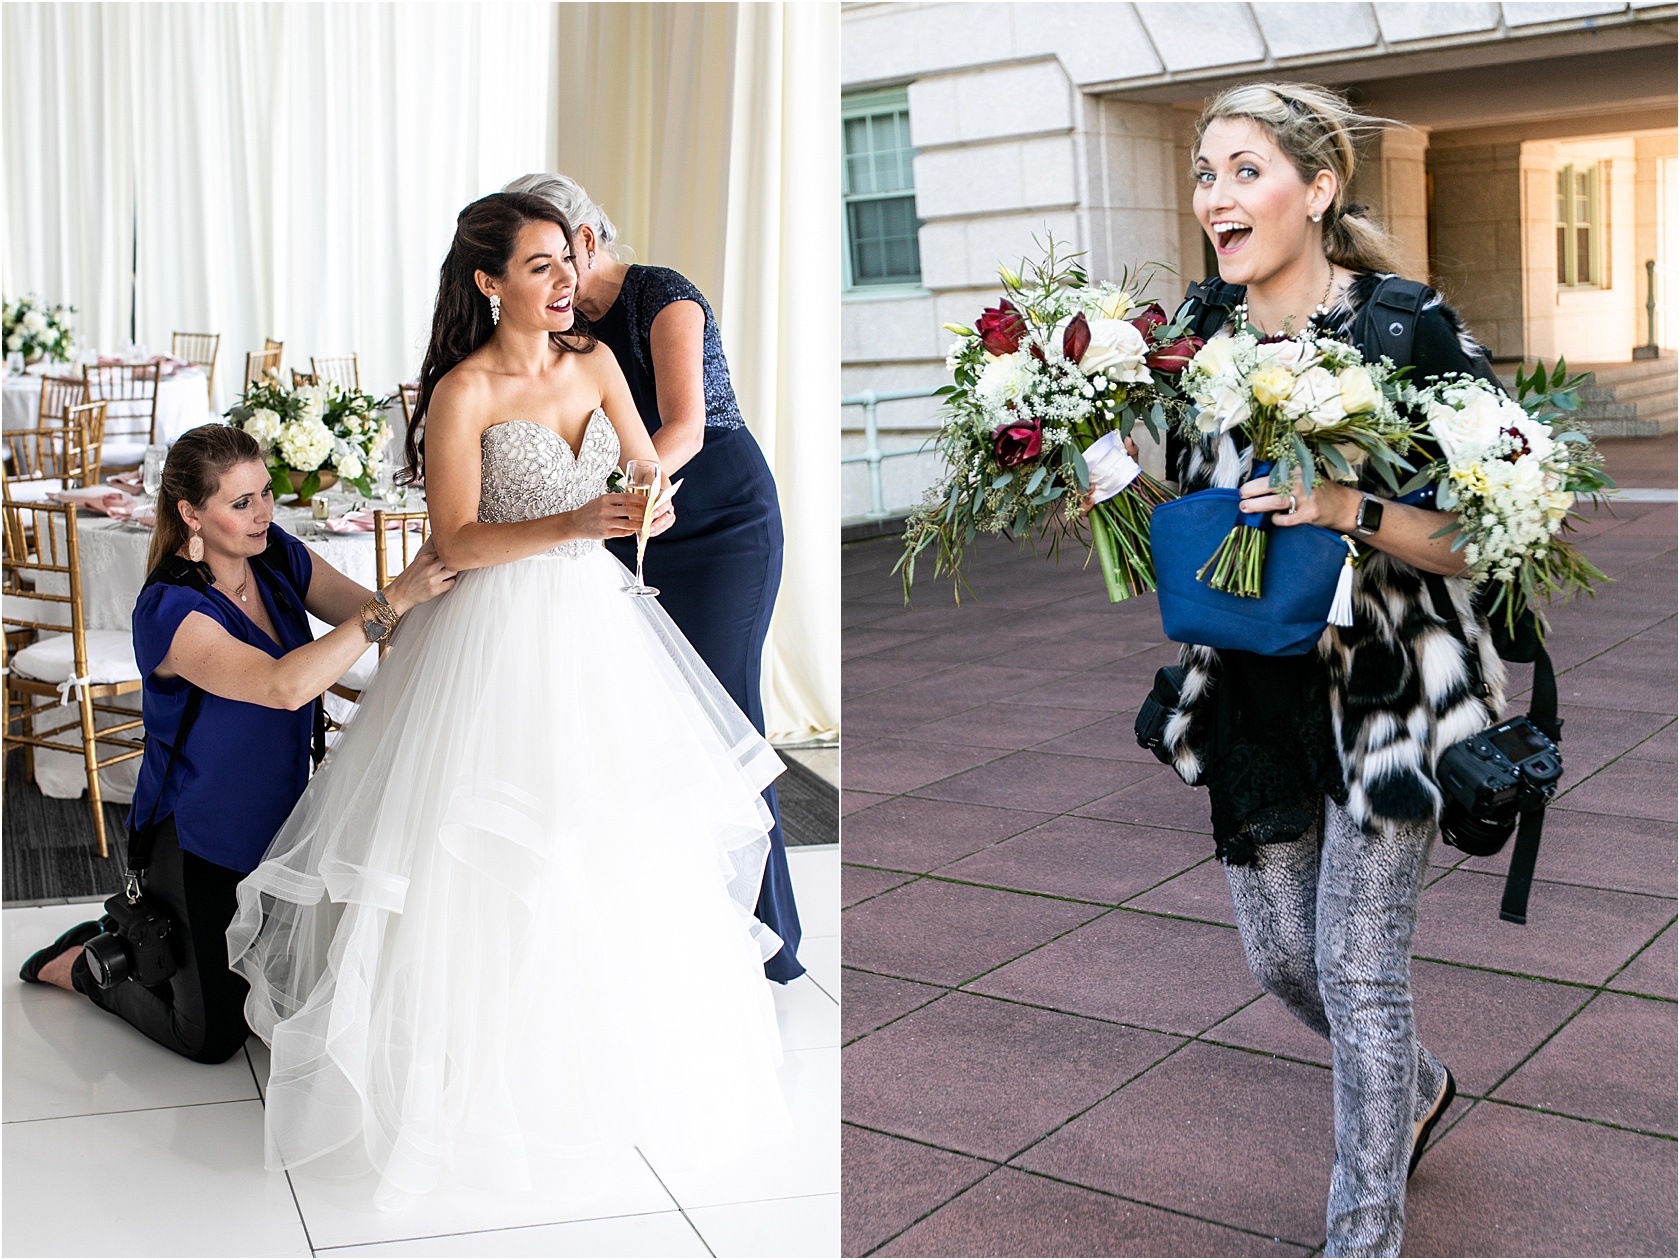  Oh, I’m not just a wedding photographer. I’ll gladly bustle your train, fix your hair, help with makeup and carry florals. That’s why they pay me the big bucks… (those things are not in contract lol) 